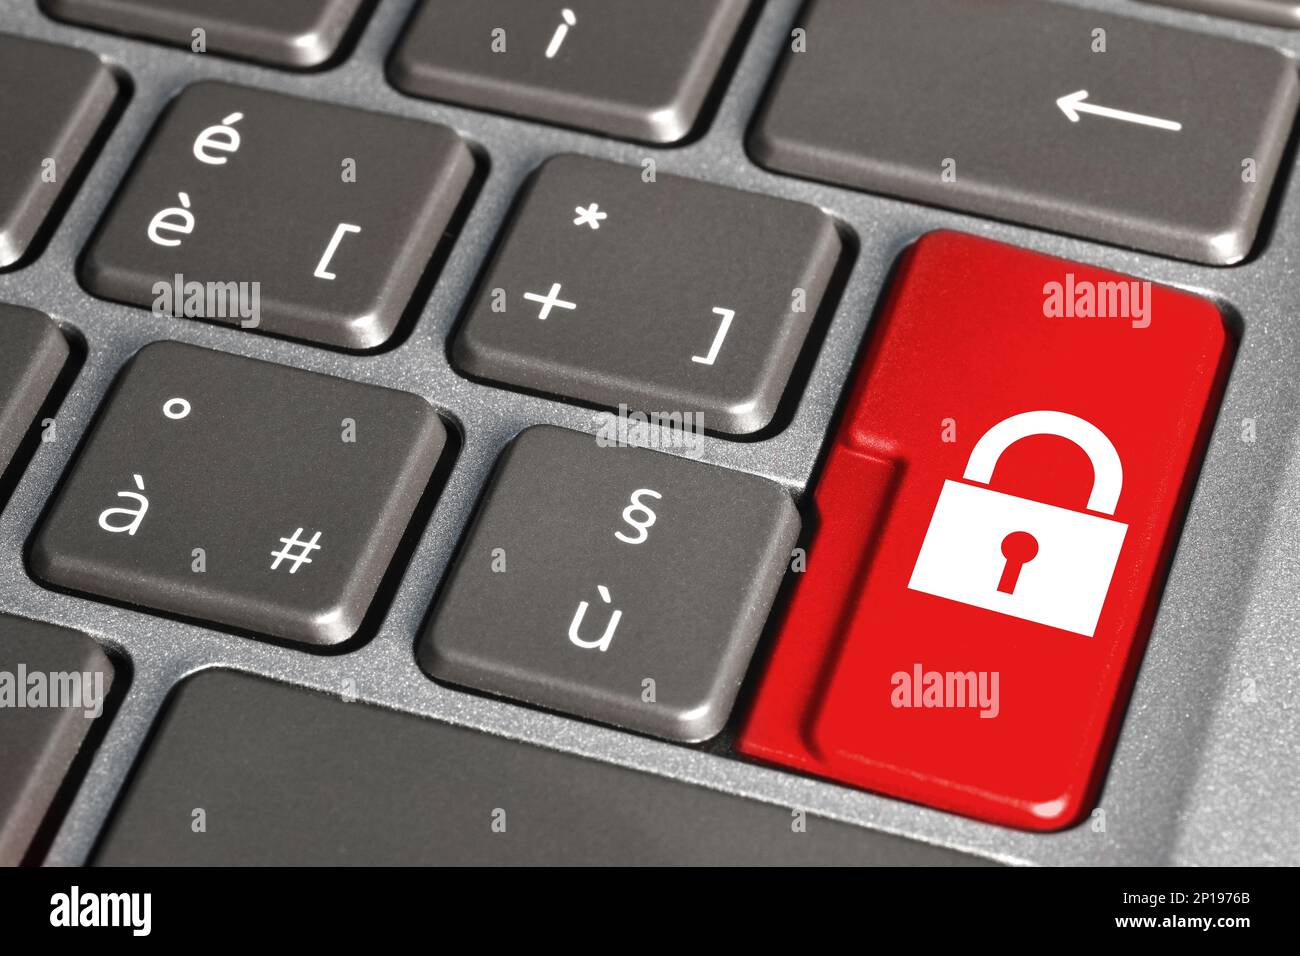 Red security button on the keyboard. Padlock symbol on red button of the Keyboard. Stock Photo